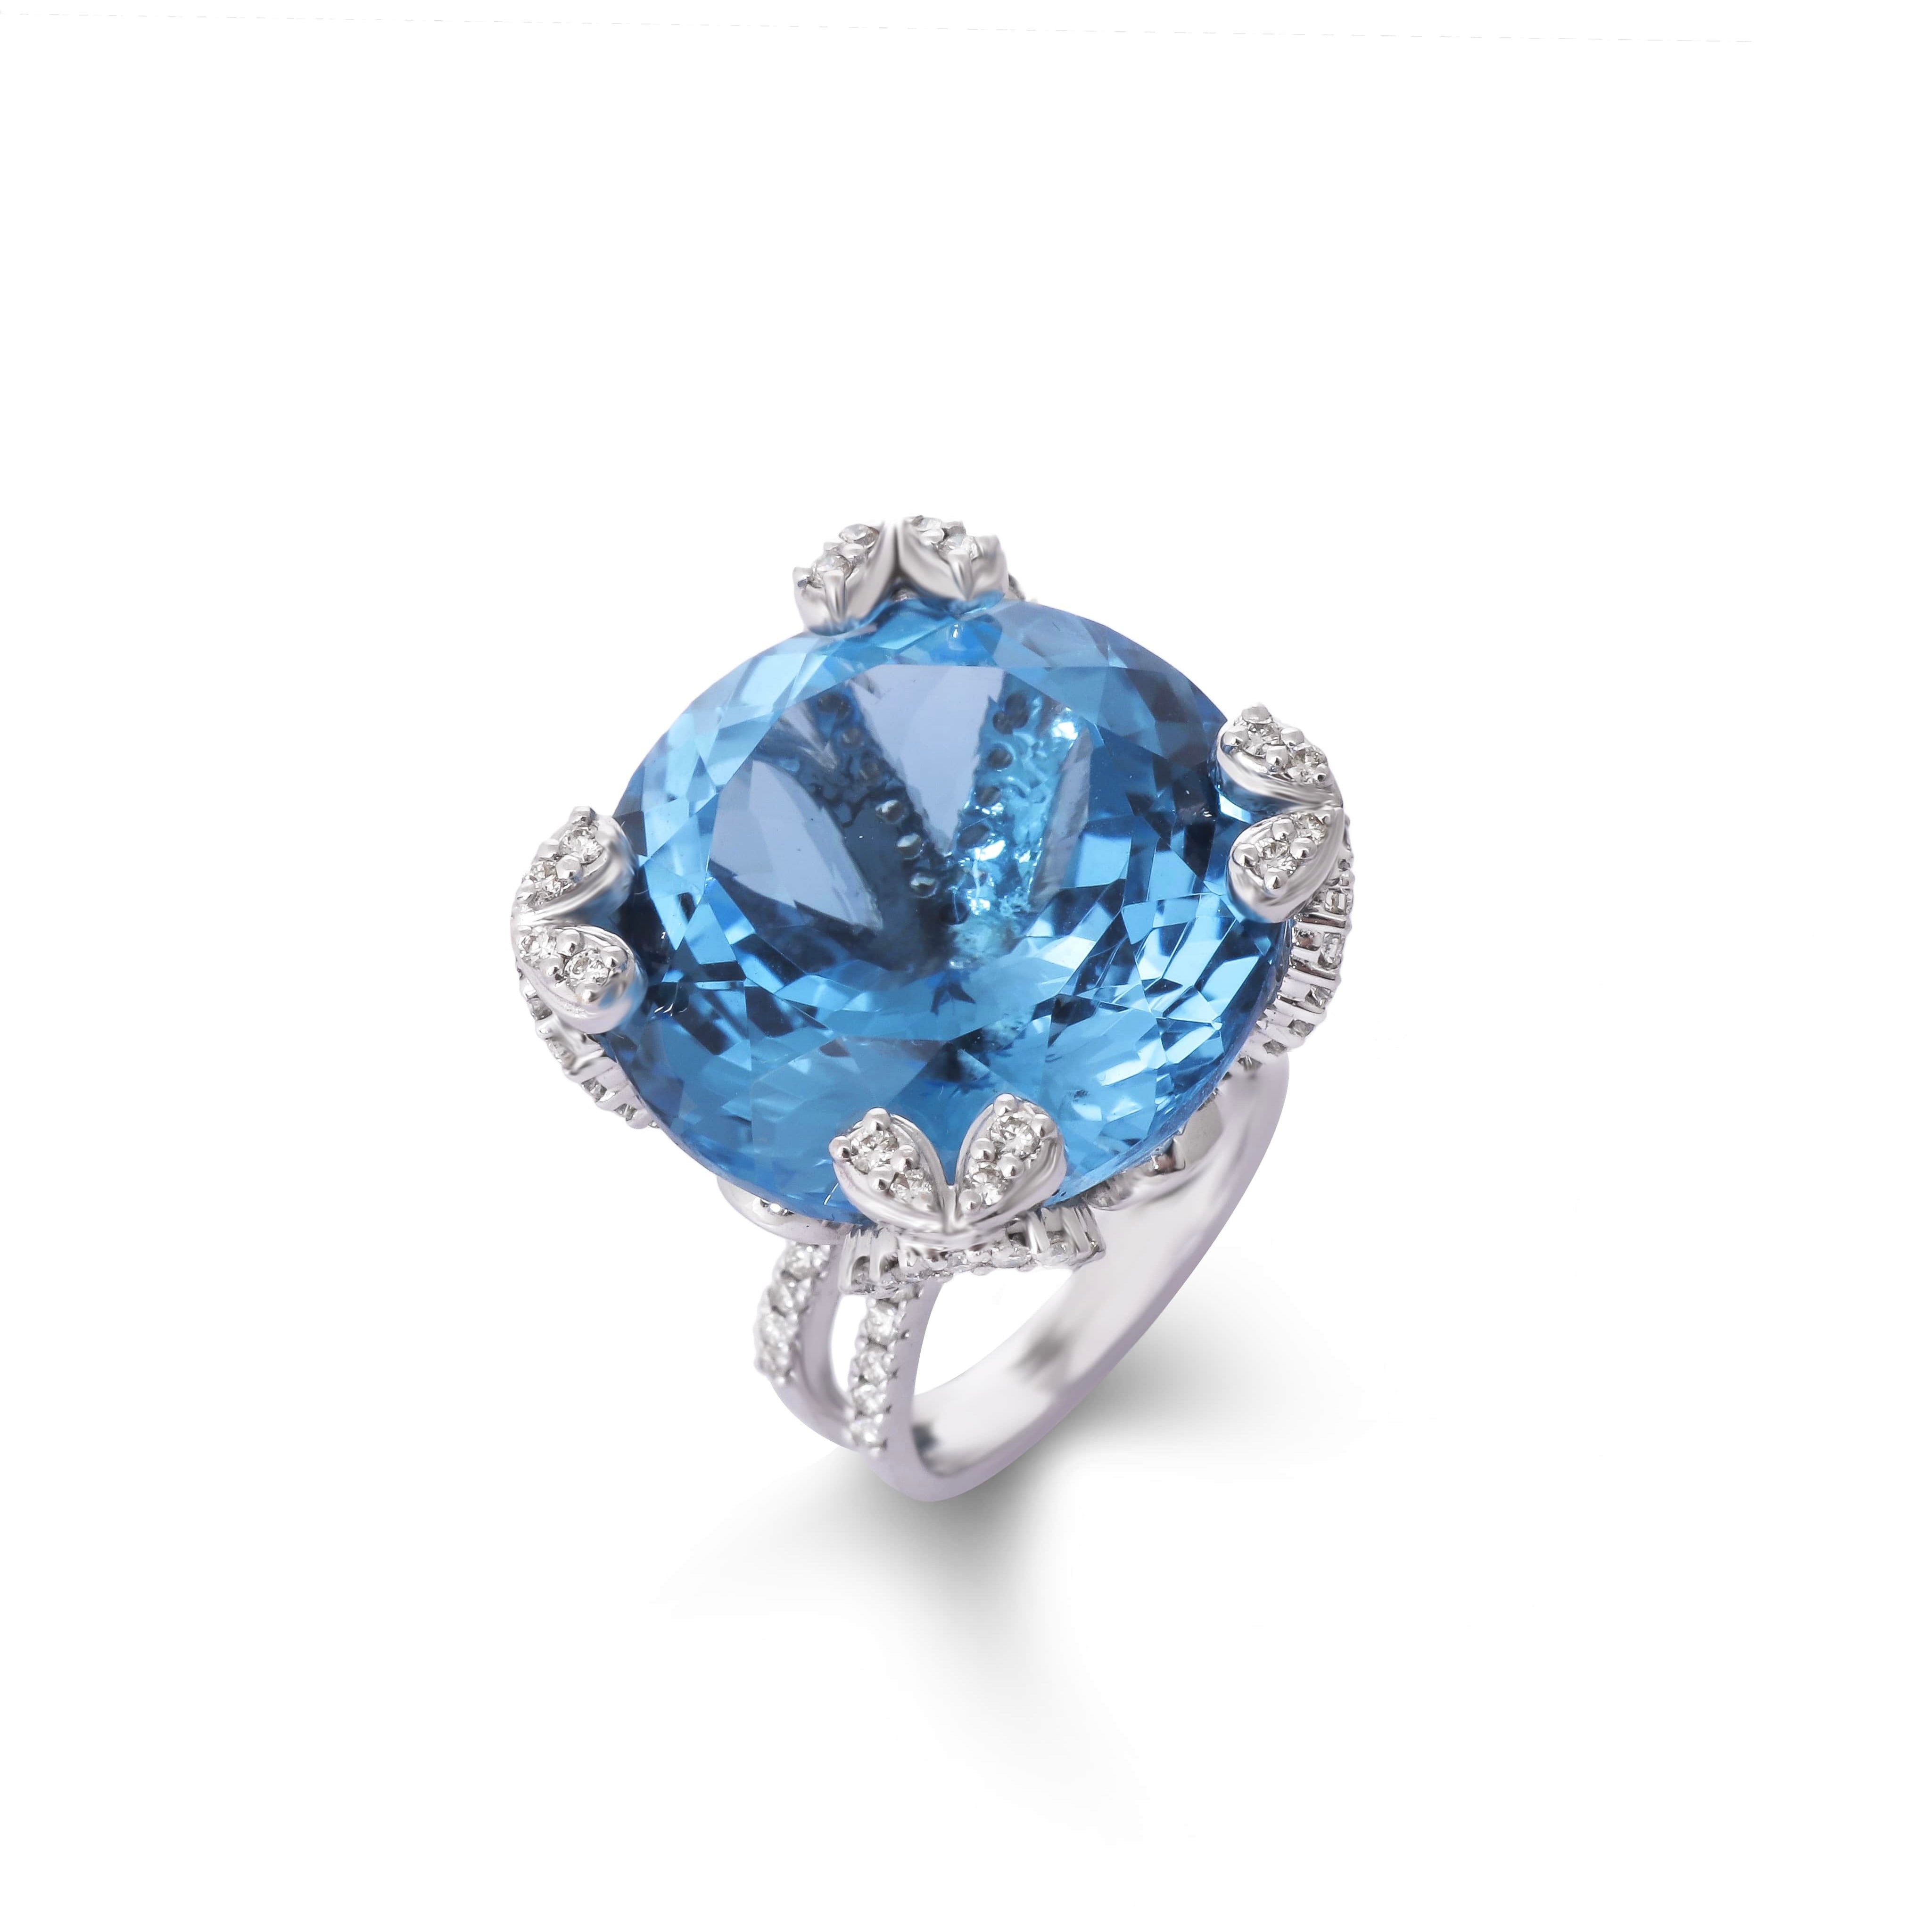 Estate large Blue Topaz & Diamond Ring (over 8 cts!), only $995